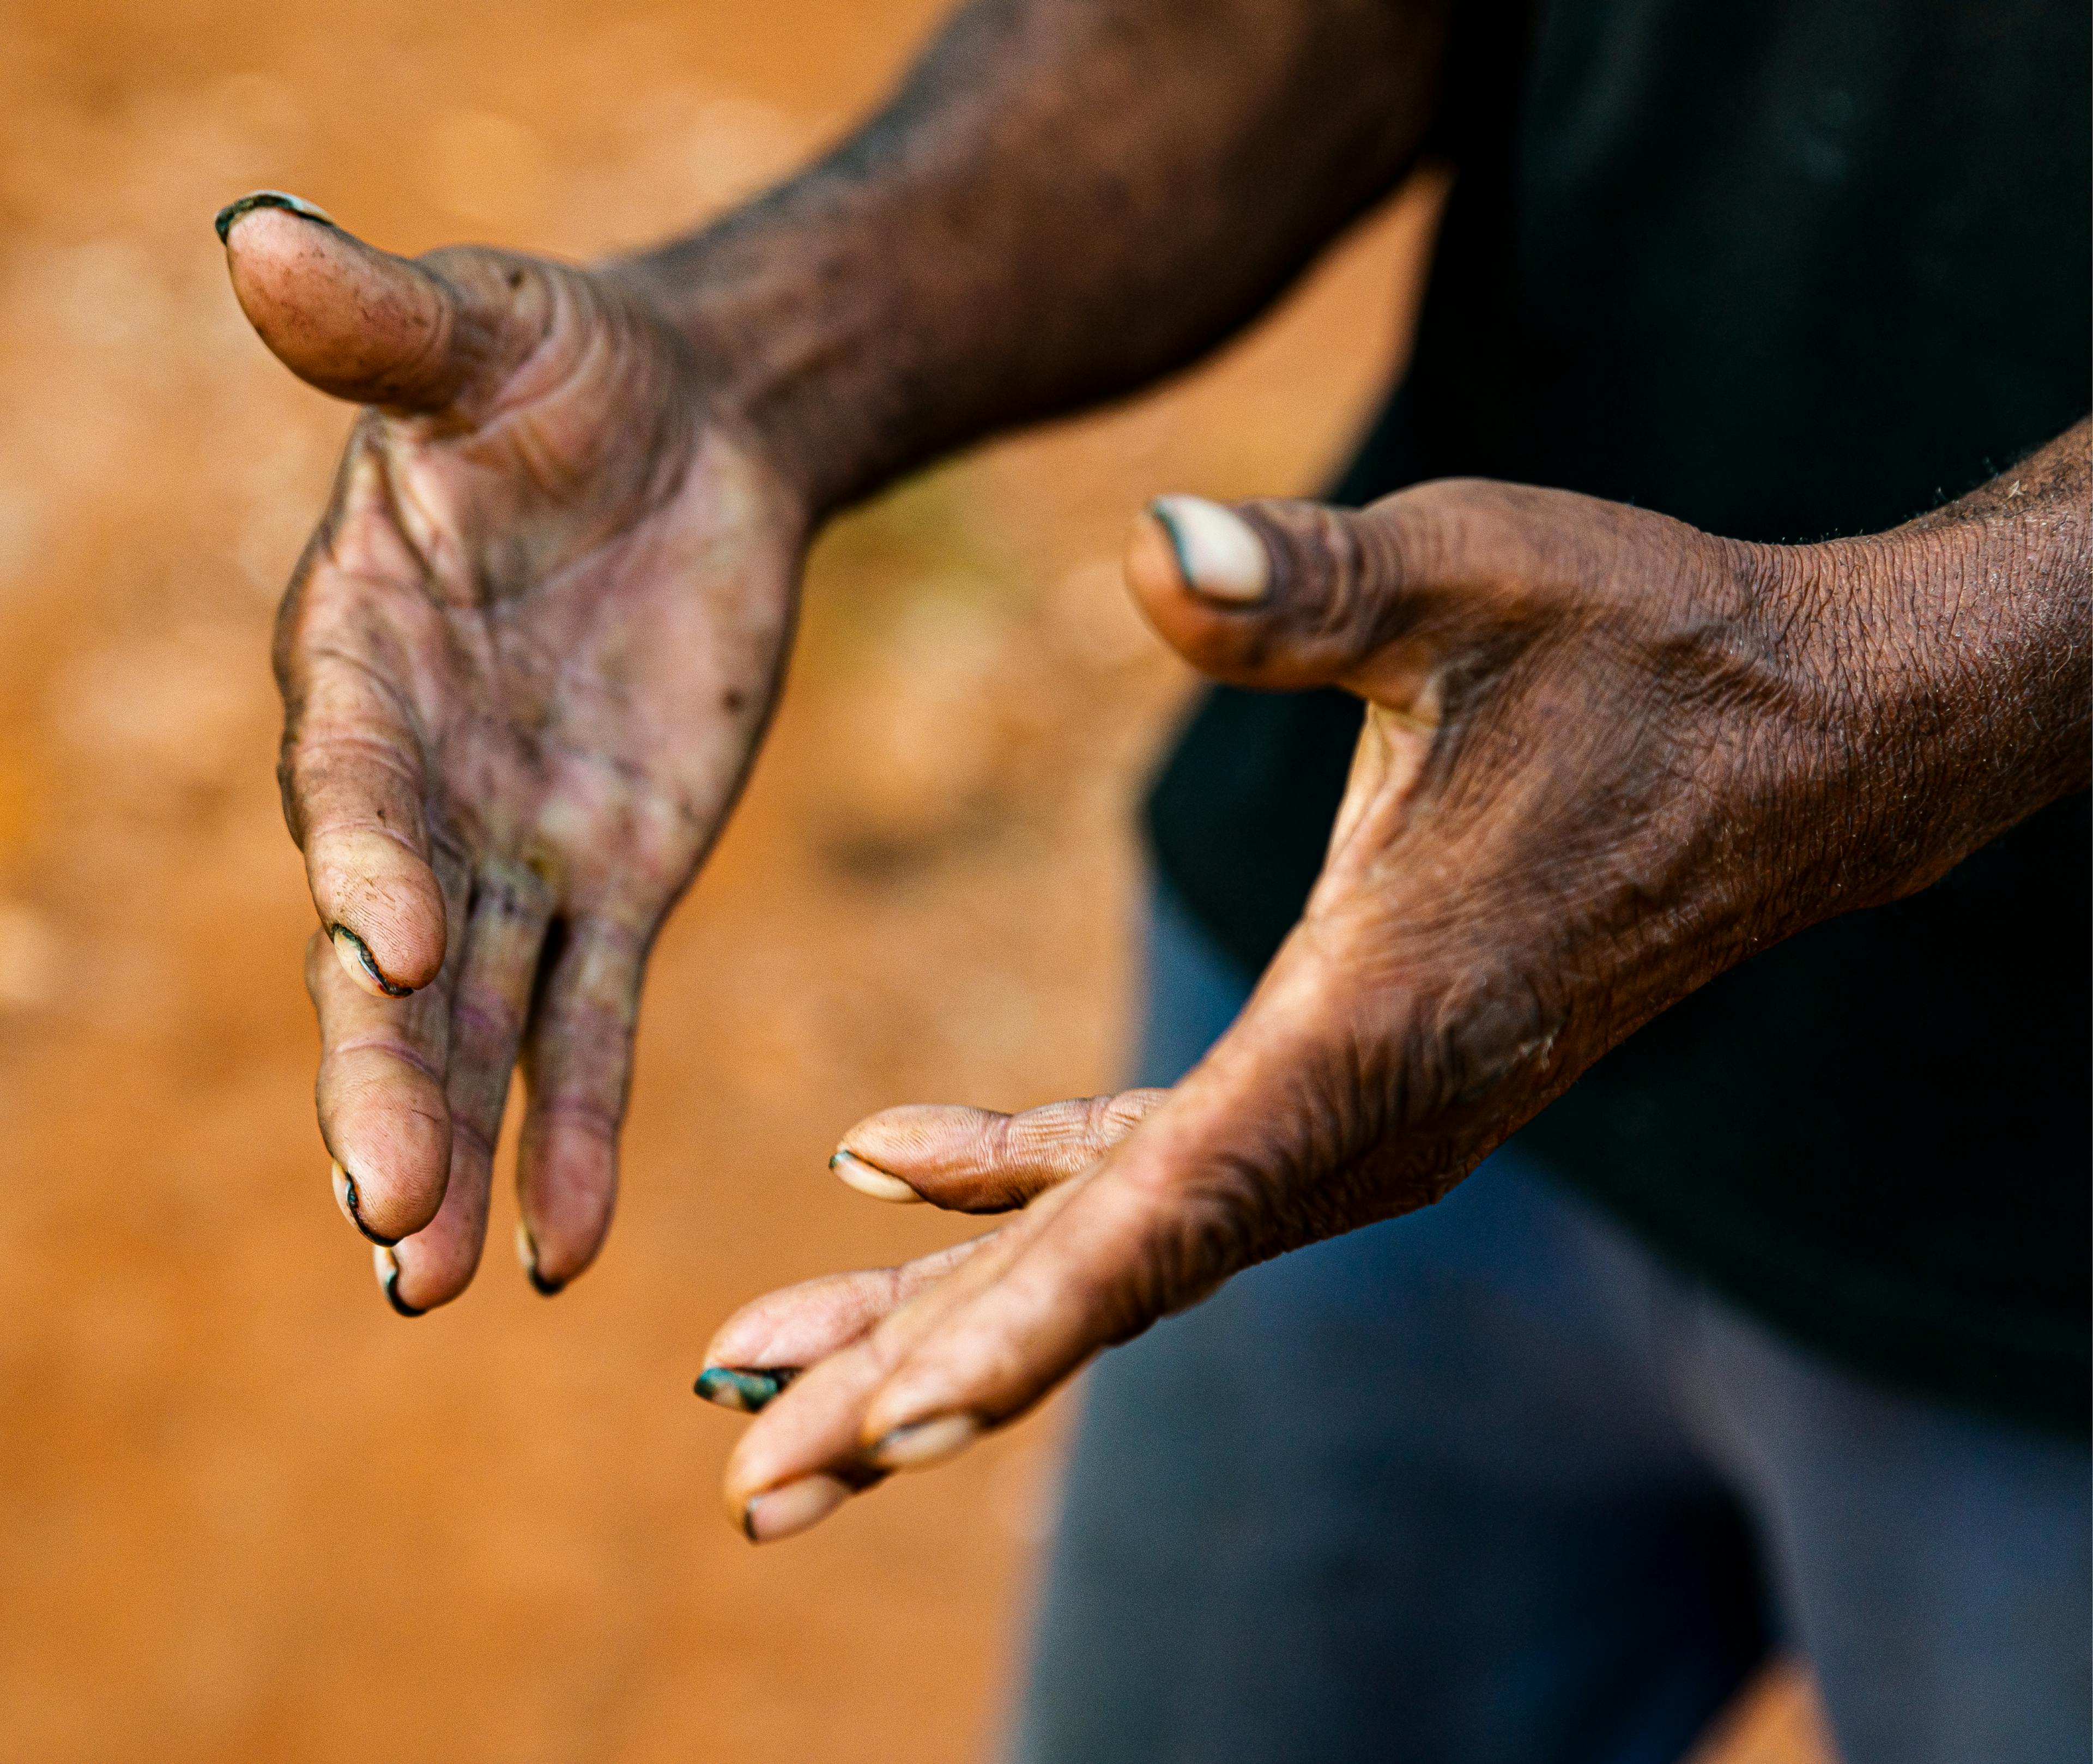 Person gesturing openly with hands - learn about first nations history with a unqiue experience on the Larapinta trail